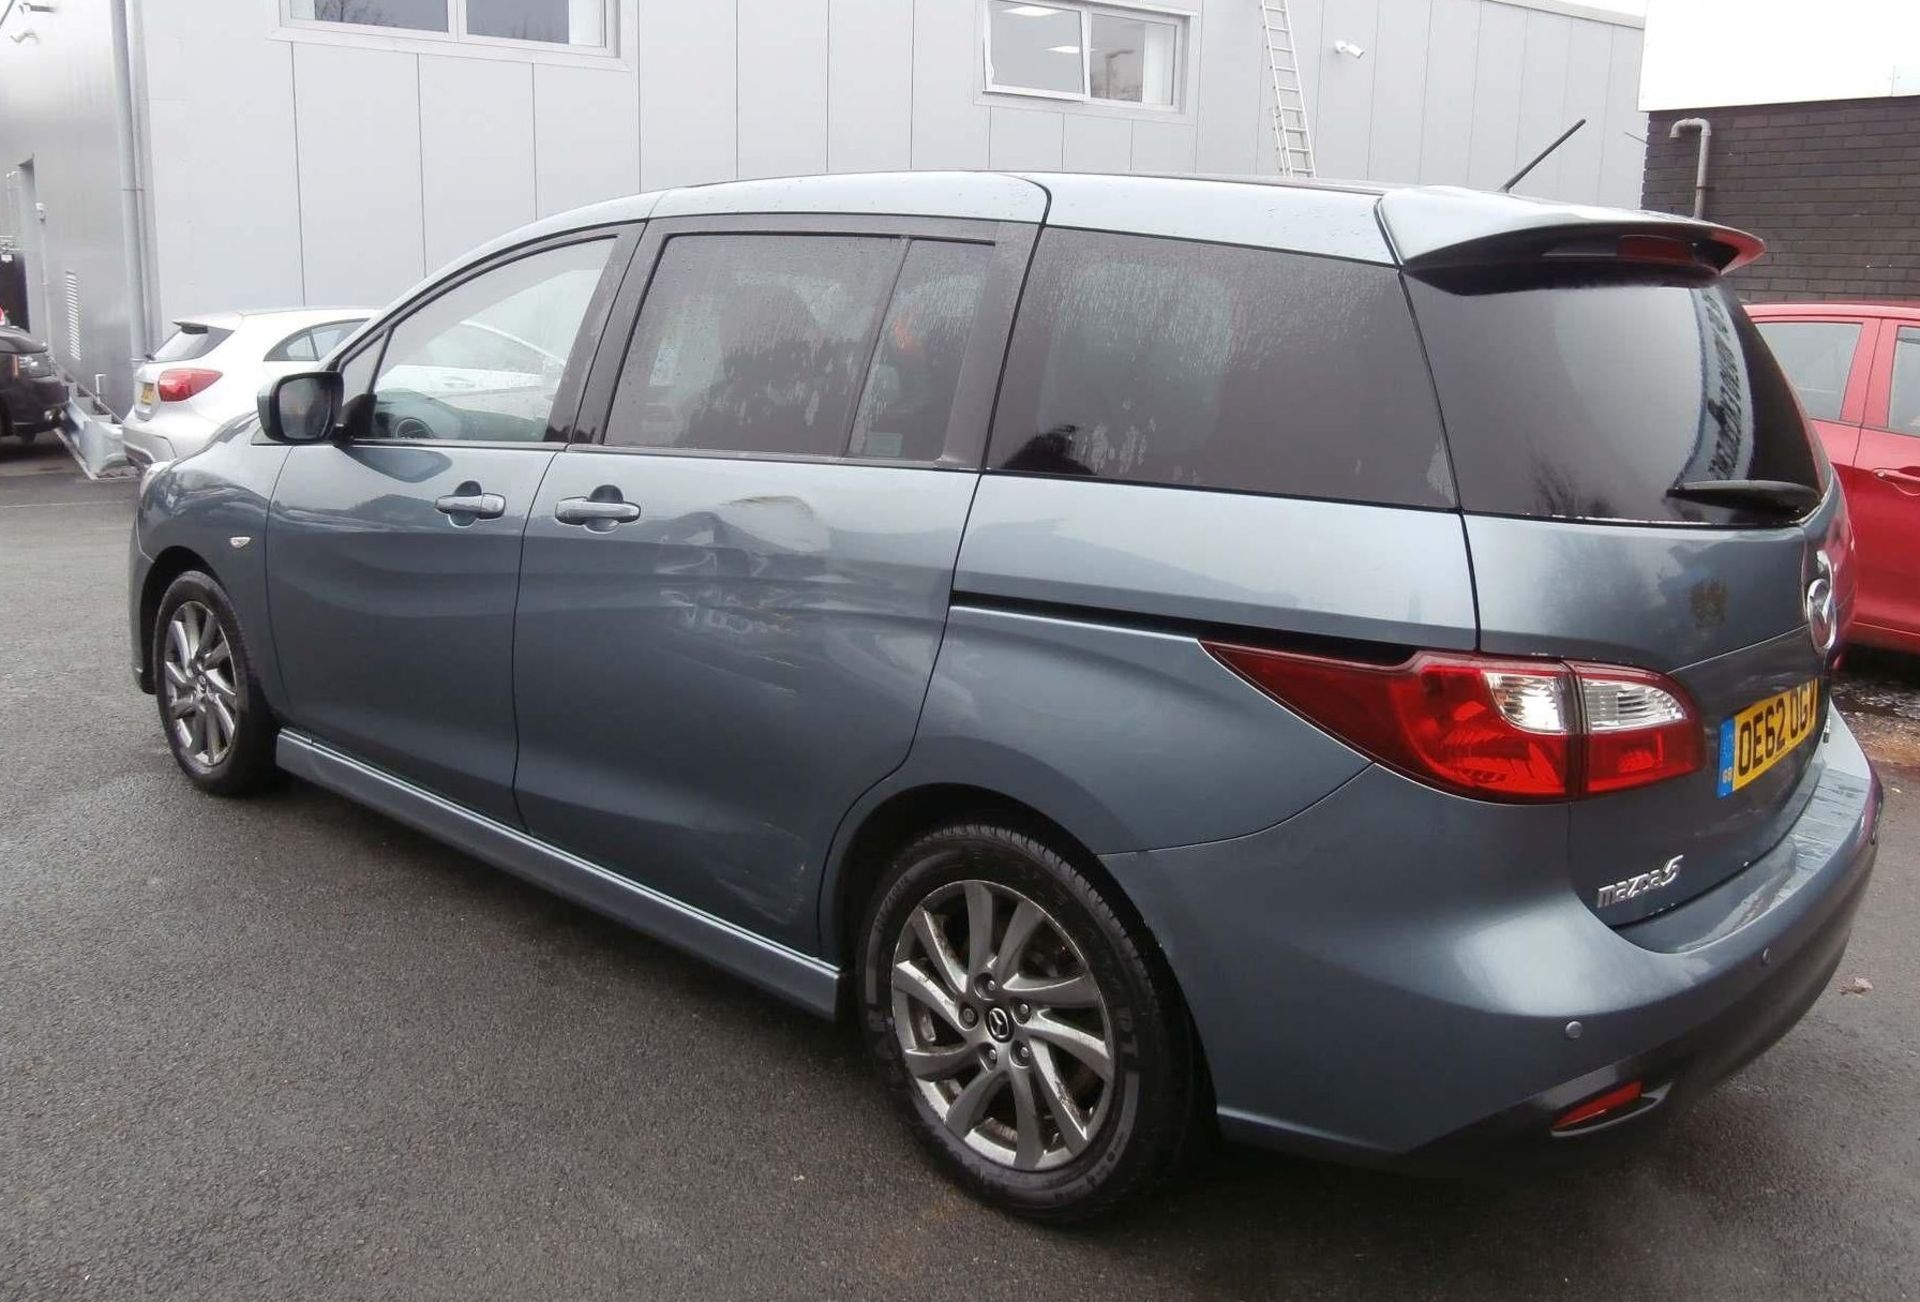 2013 Mazda 5 2.0 Venture Edition 5 Dr MPV - CL505 - NO VAT ON THE HAMMER - Location: Corby, N - Image 8 of 9